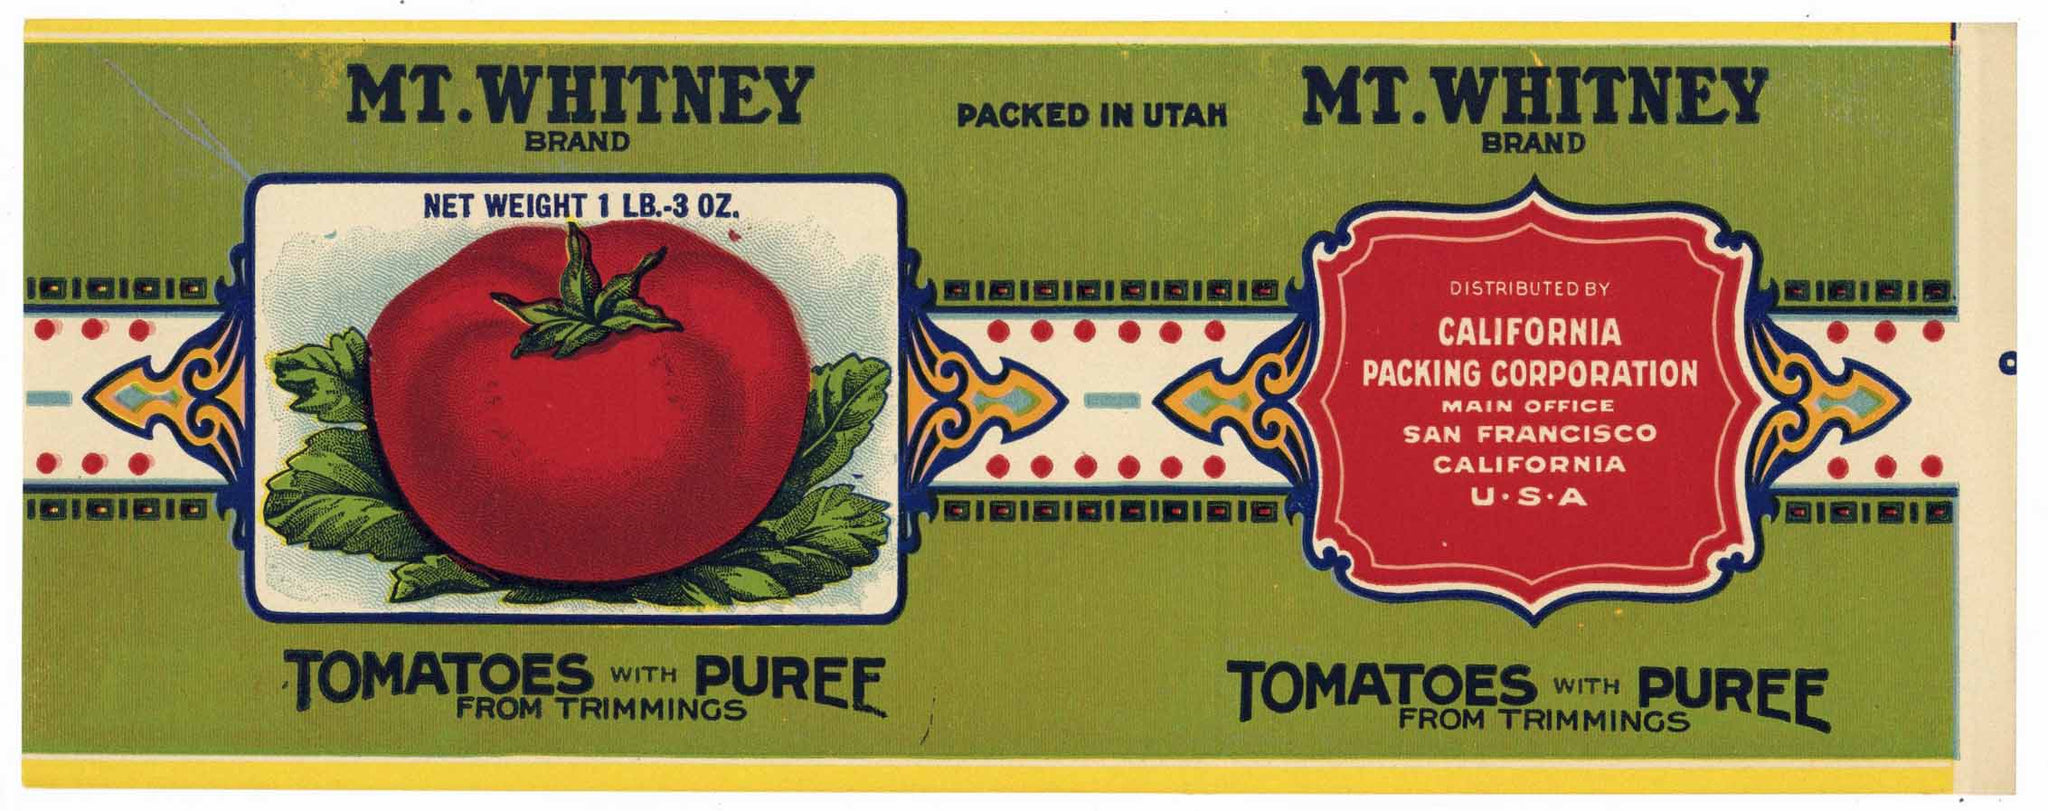 Mt. Whitney Brand Vintage Tomato Can Label